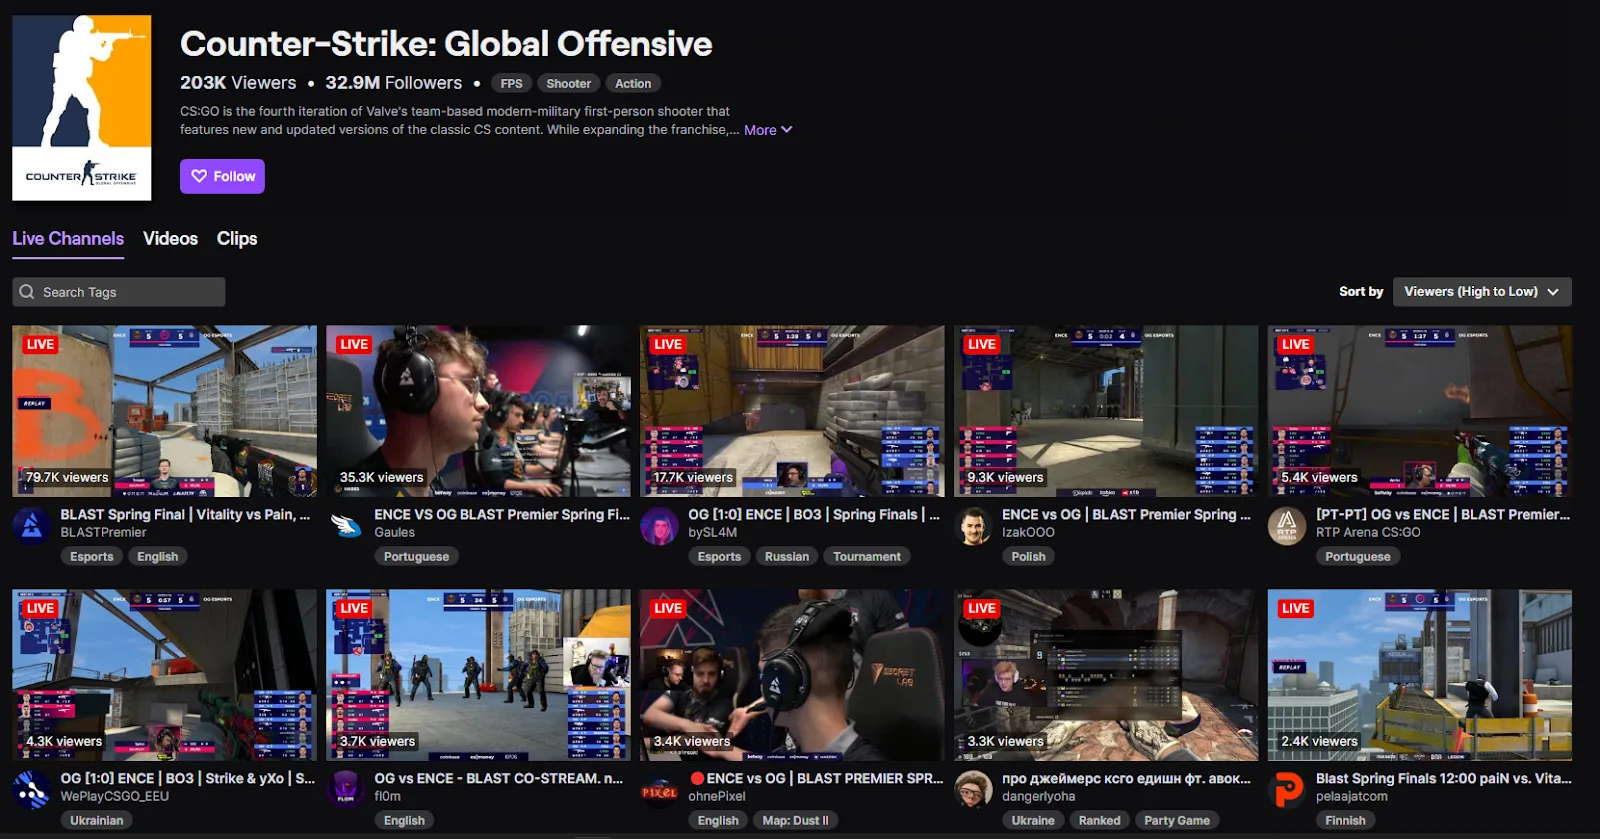 CS:GO is always one of the most viewed categories on Twitch and other platforms.